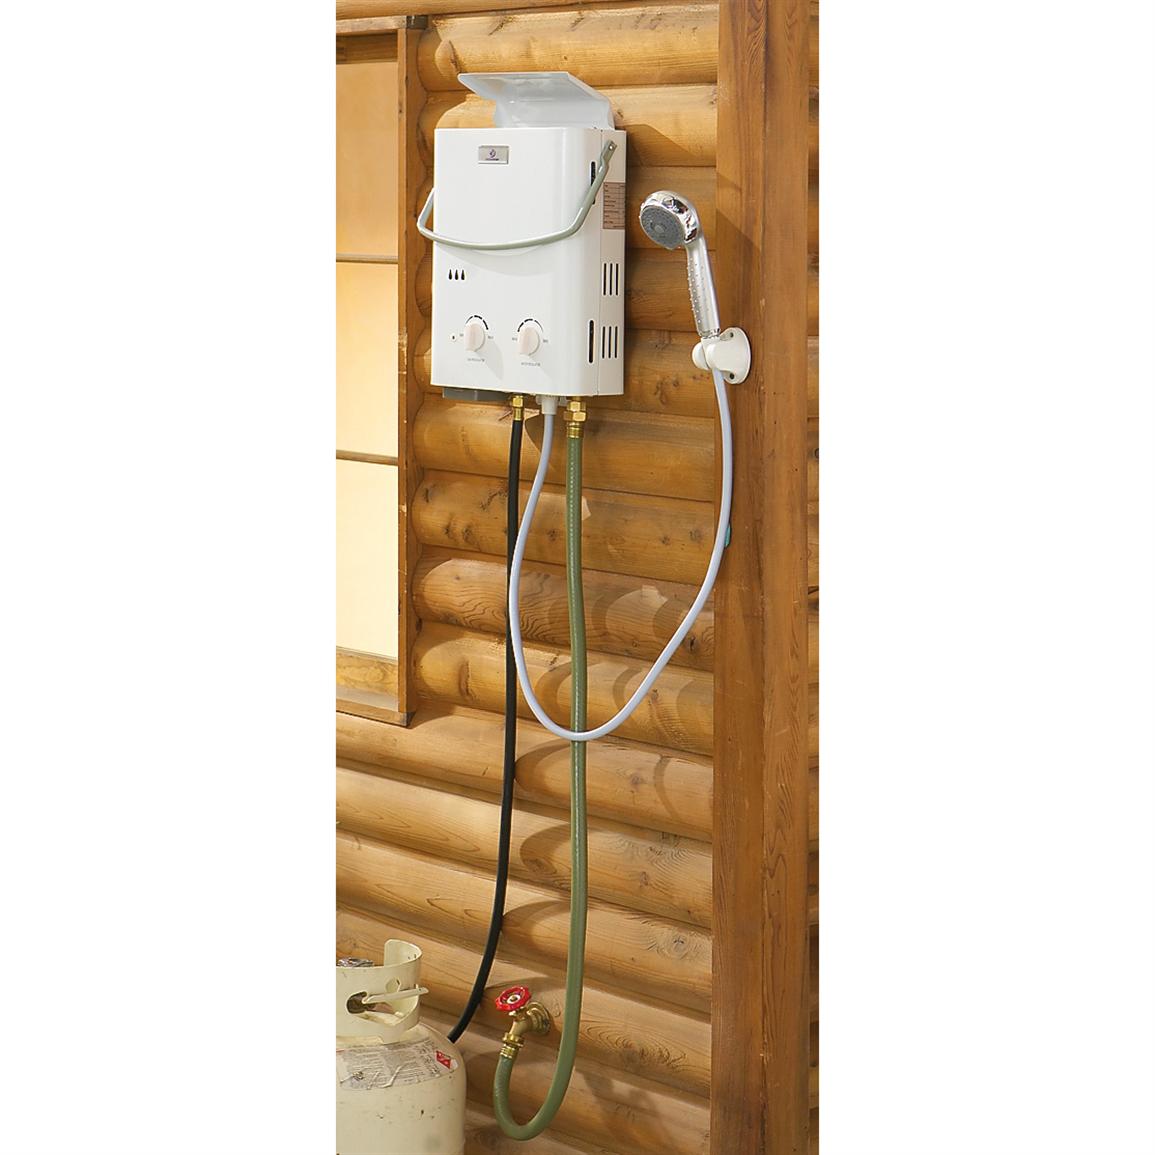 Portable Hot Water Heaters 118